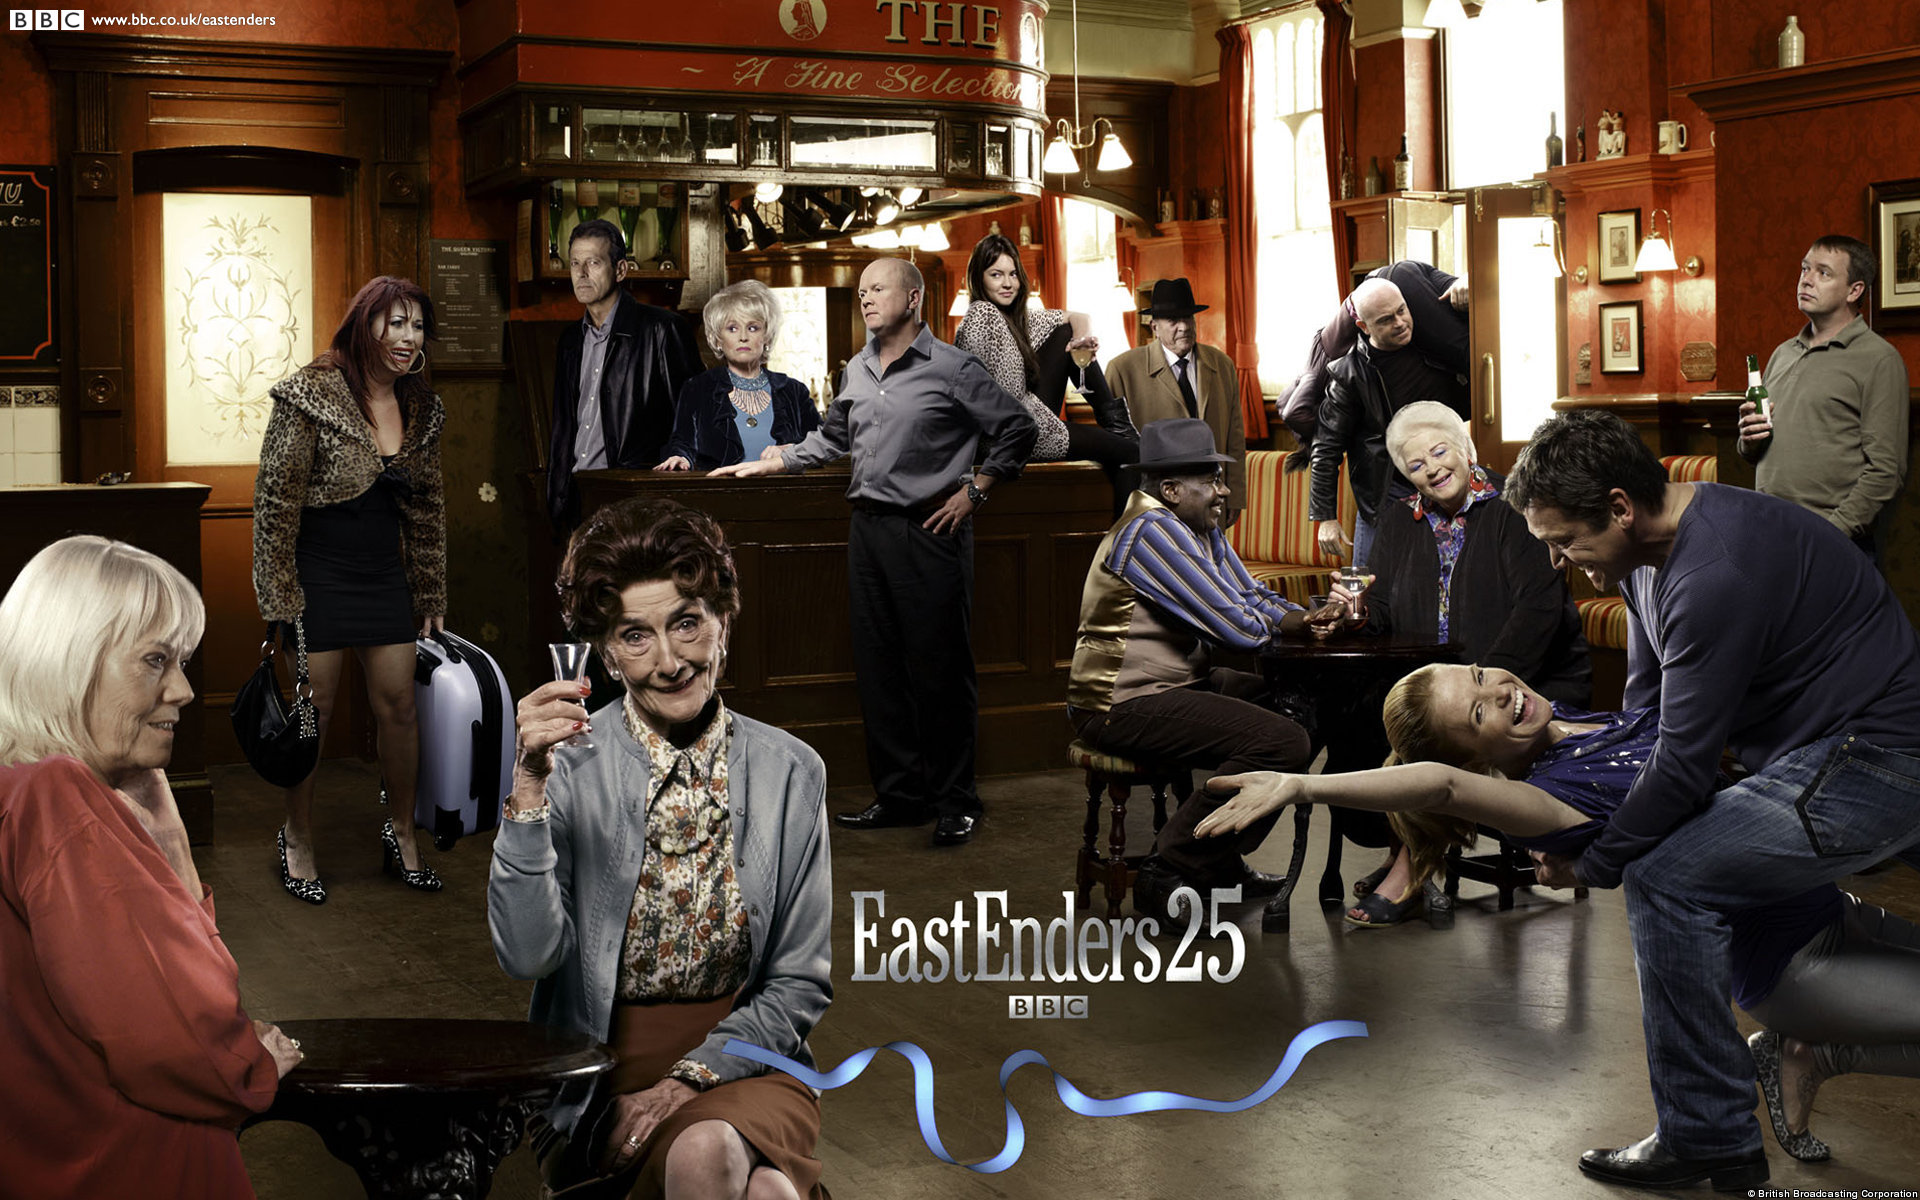 Wallpaper, families, icons, walford, image, eastenders, vision, gallery